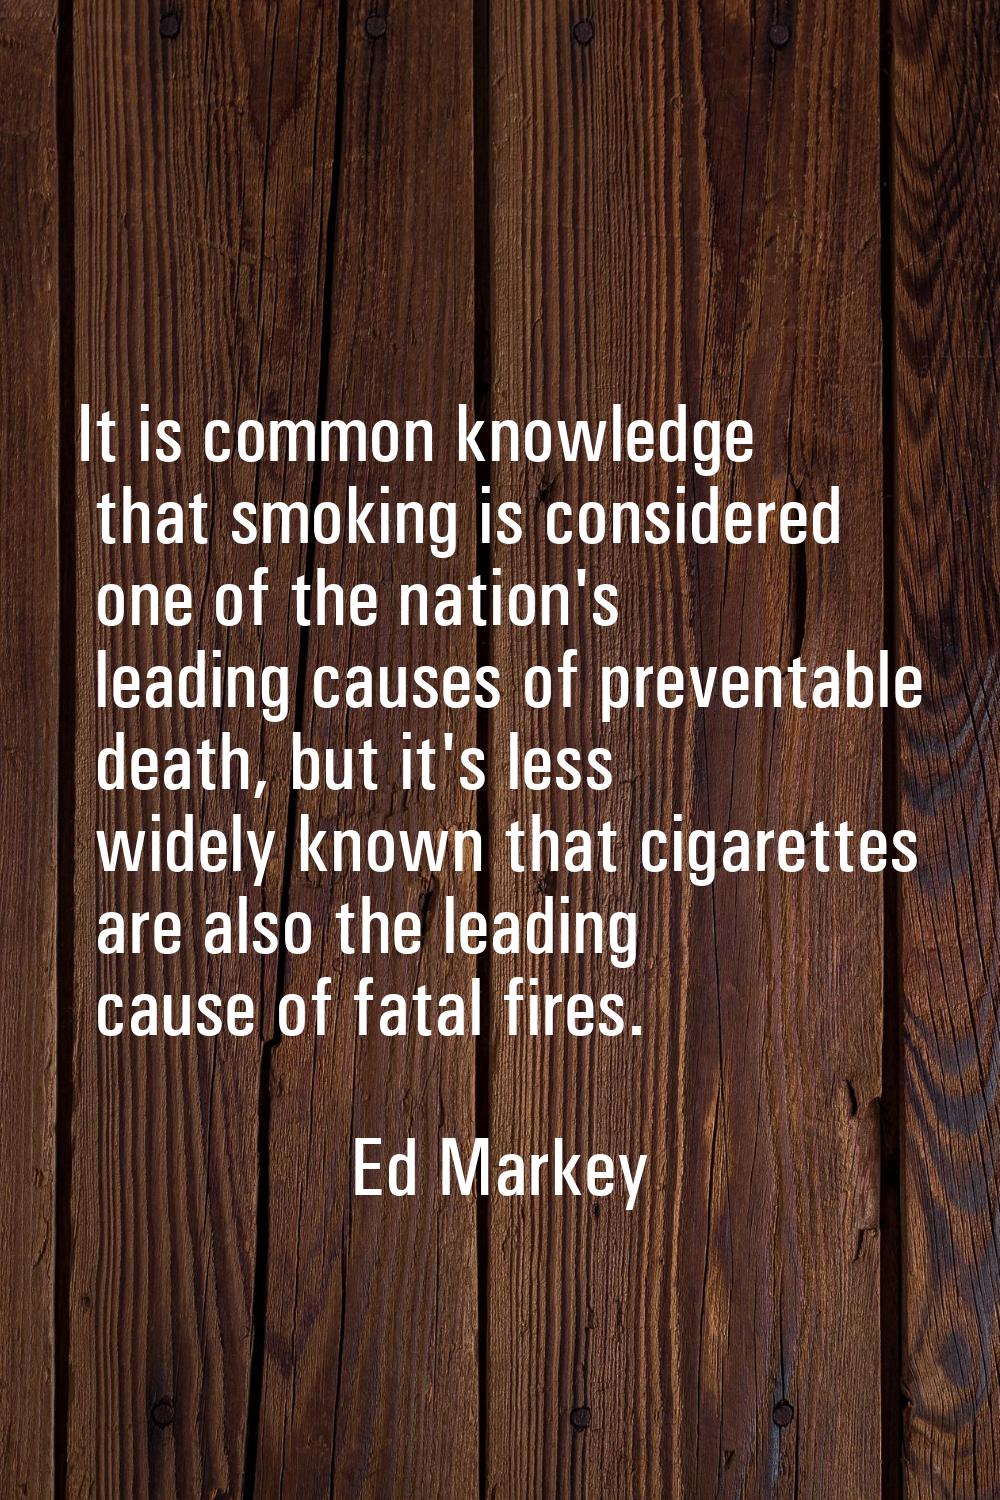 It is common knowledge that smoking is considered one of the nation's leading causes of preventable